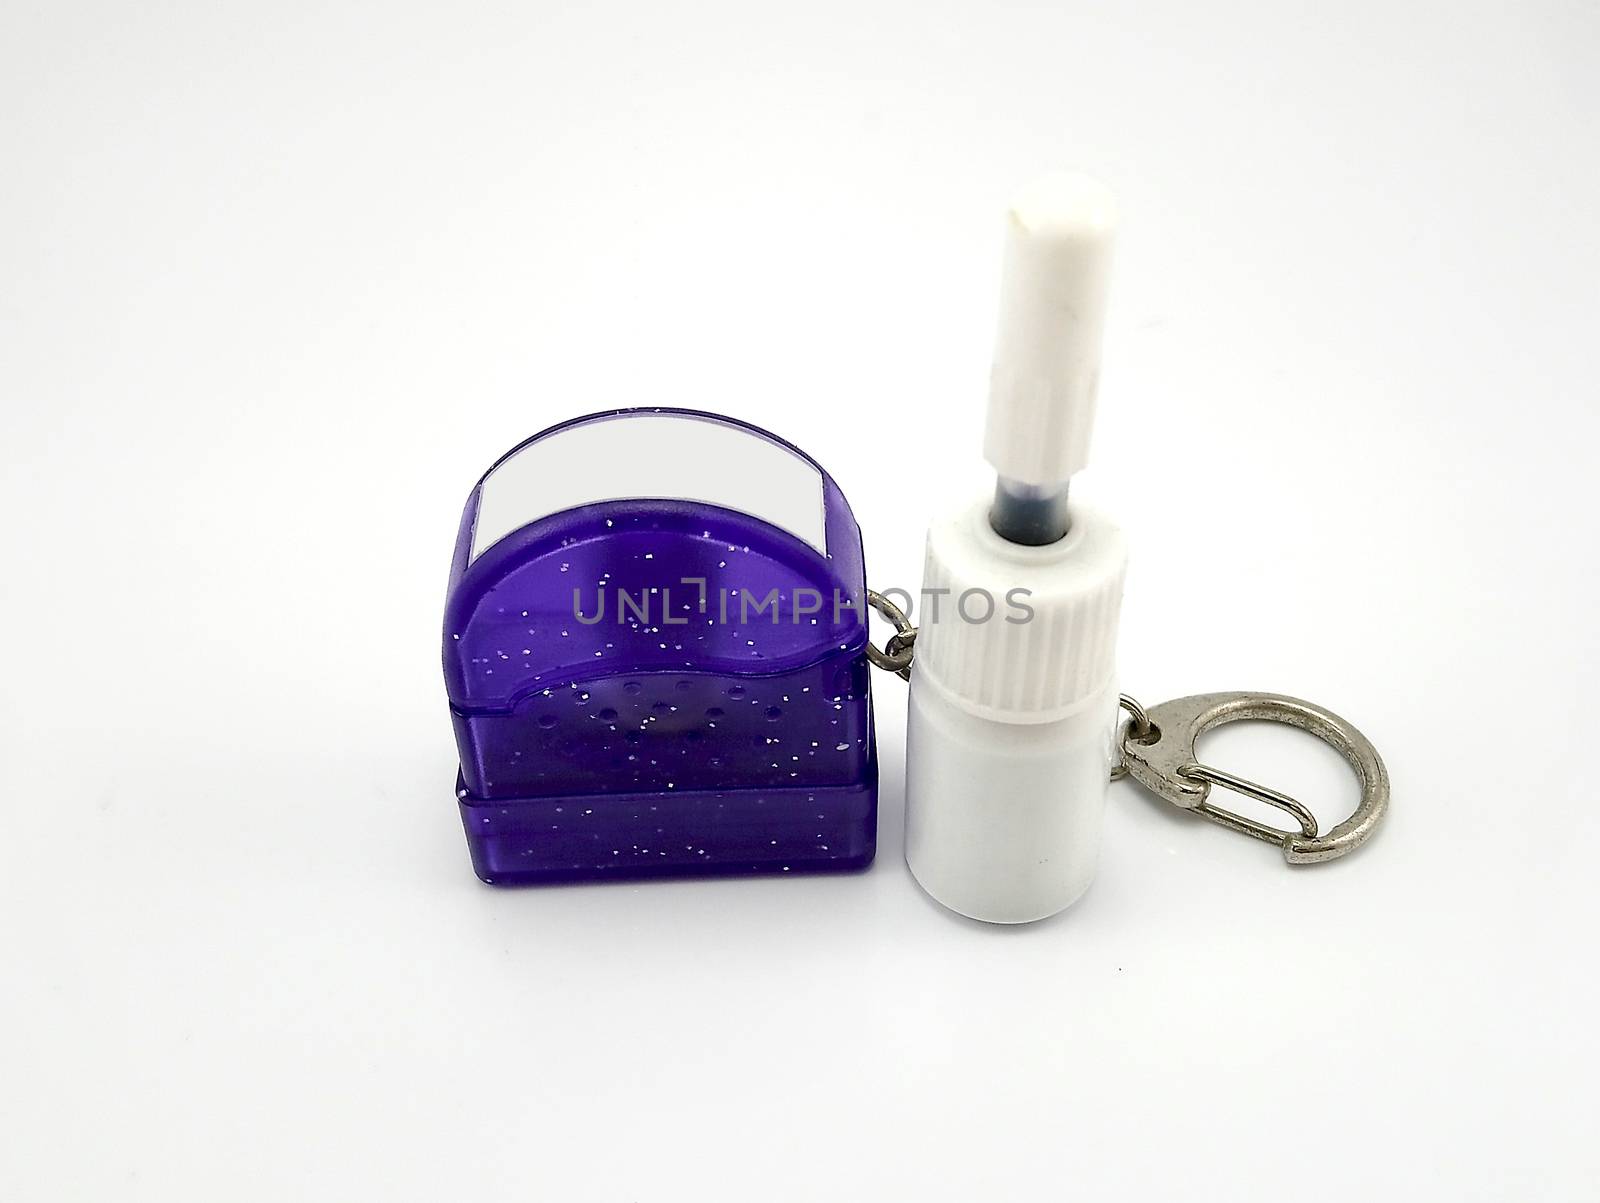 Liquid black refill ink placed in small white plastic bottle and Small purple plastic glitters stamp with metal key ring use to stamp on paper